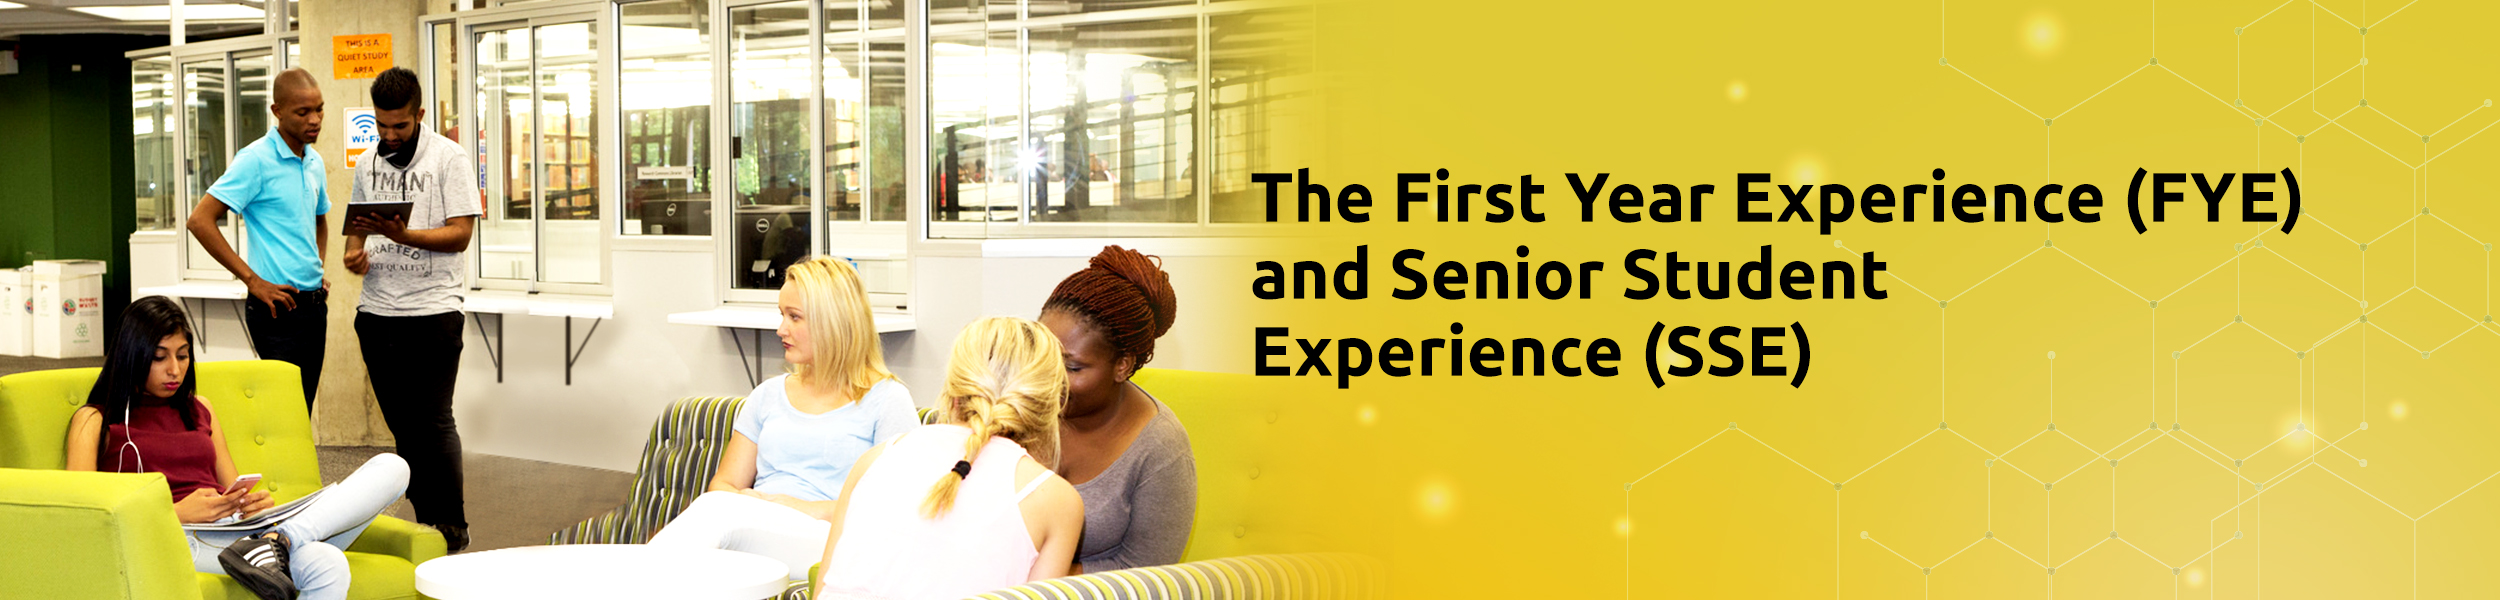 The First Year Experience (fye) And Senior Student Experience (sse)